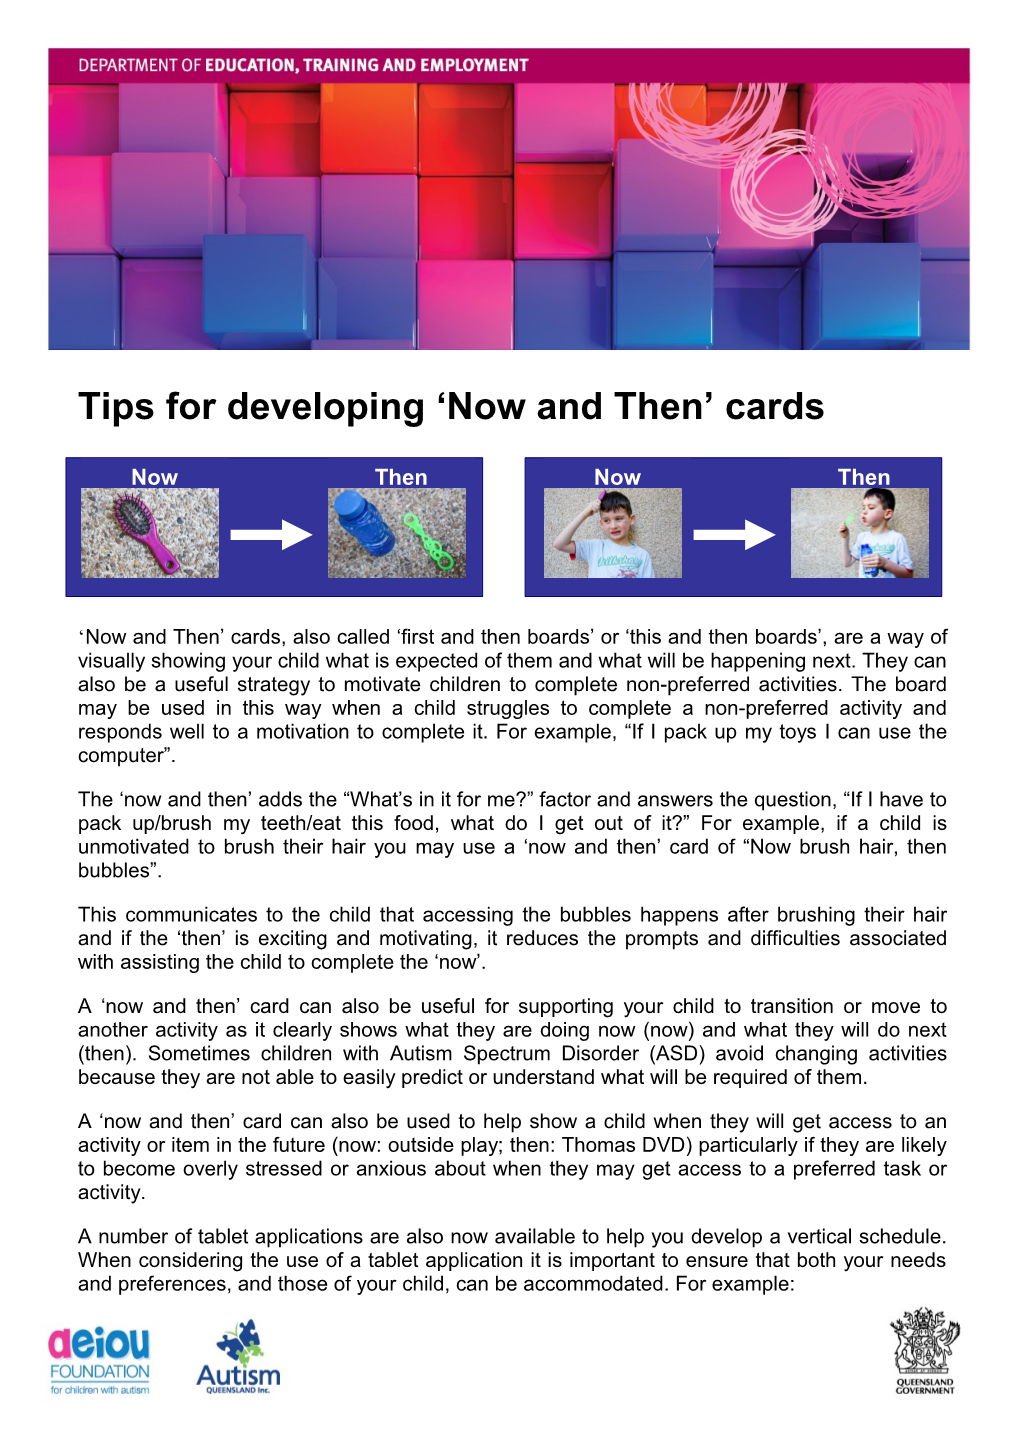 Tips for Now and Then Cards